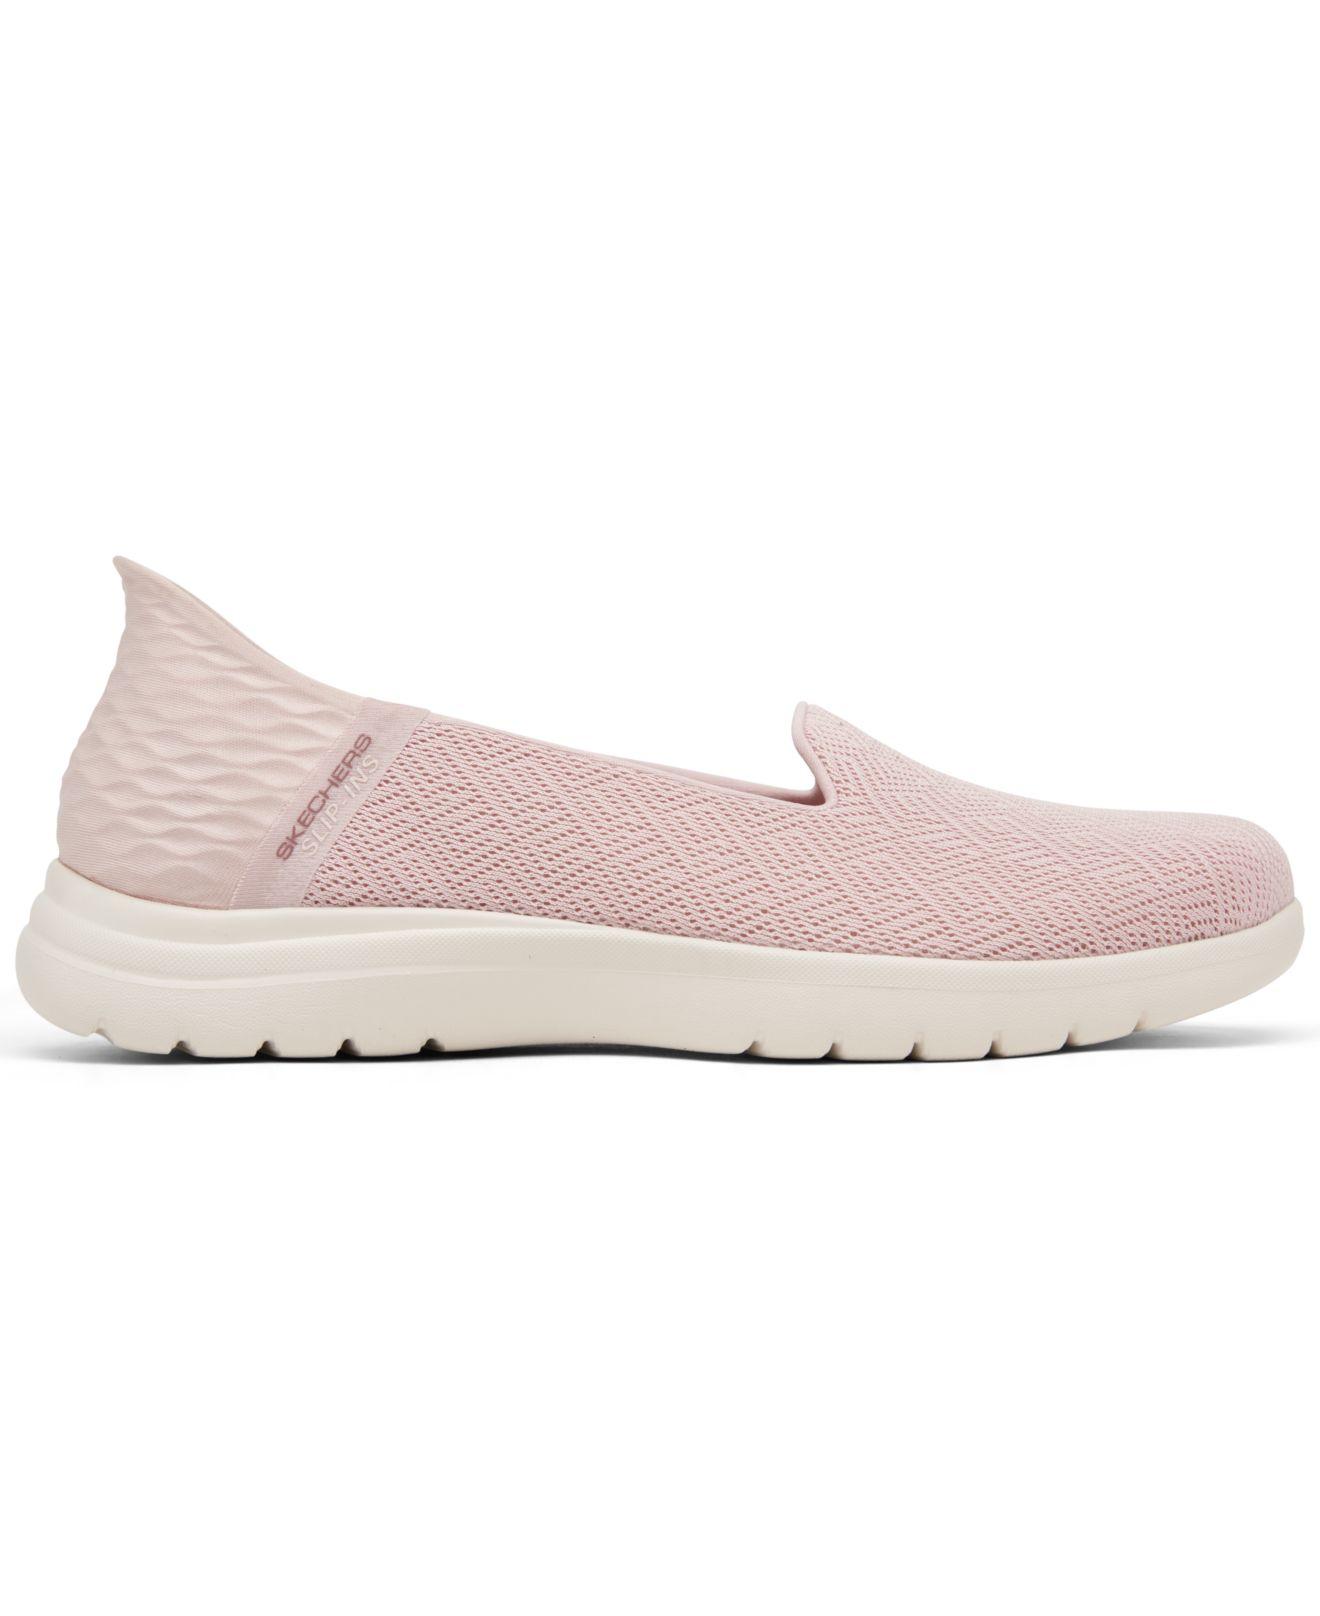 enthusiastic Loosen affix Skechers Slip-ins- On-the-go Flex - Astonish Slip-on Walking Sneakers From  Finish Line in Pink | Lyst